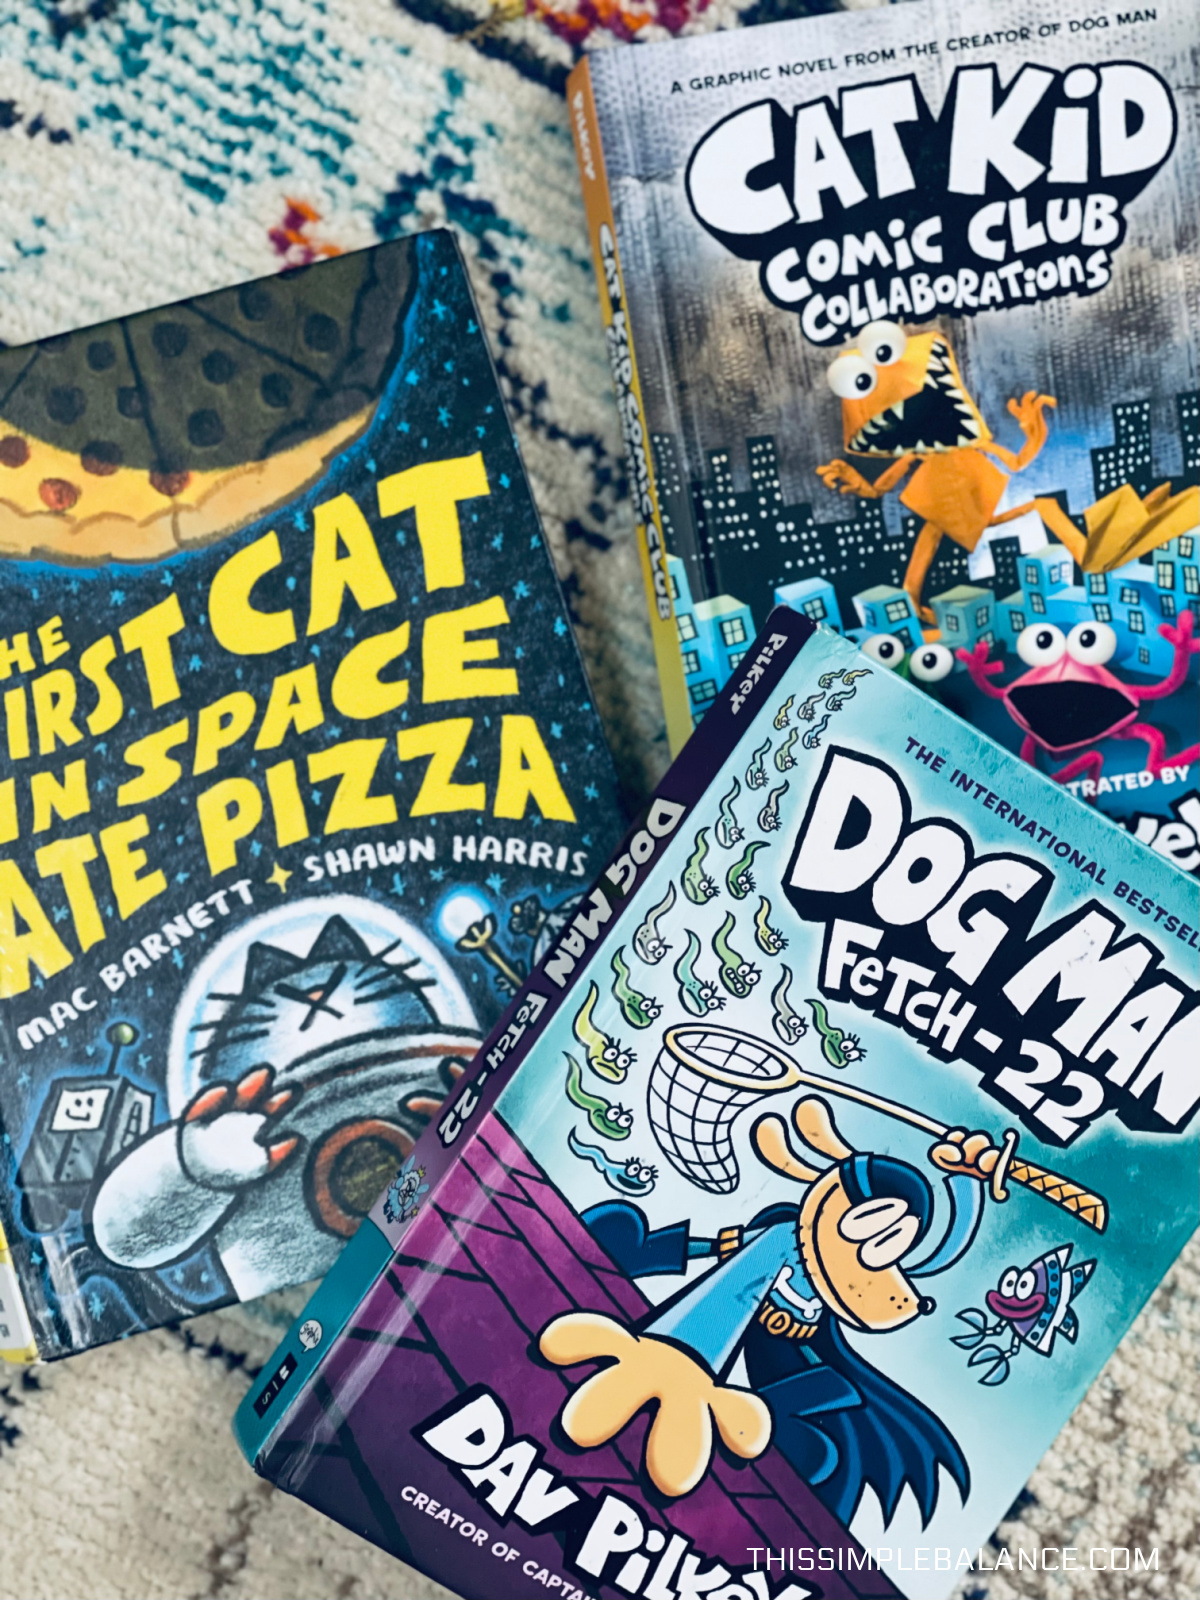 Dog Man book, Cat Kid Comic Club book and The First Cat in Space Ate Pizza book.